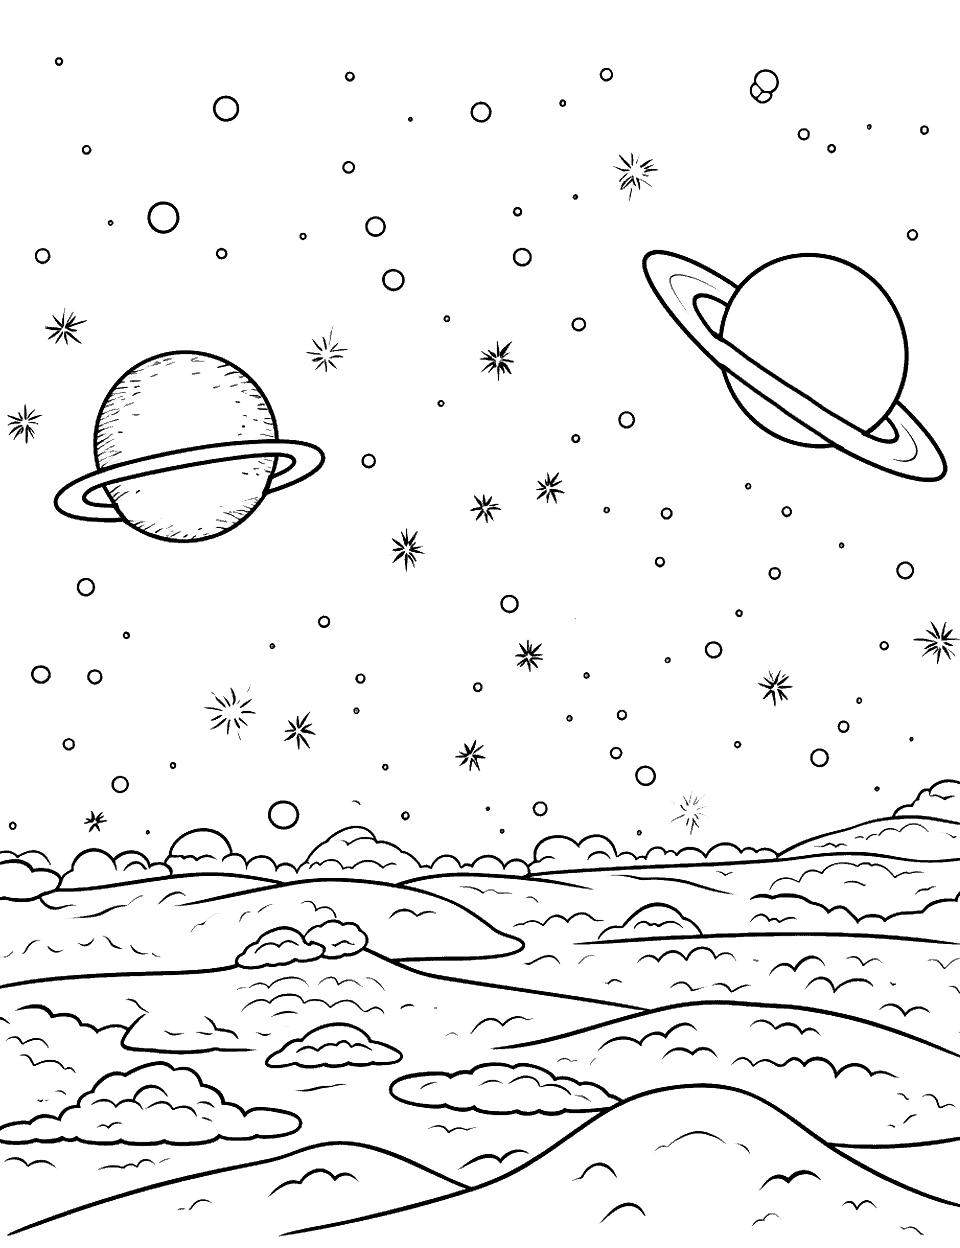 Martian Dust Storm Solar System Coloring Page - A large dust storm covering part of Mars’ surface.